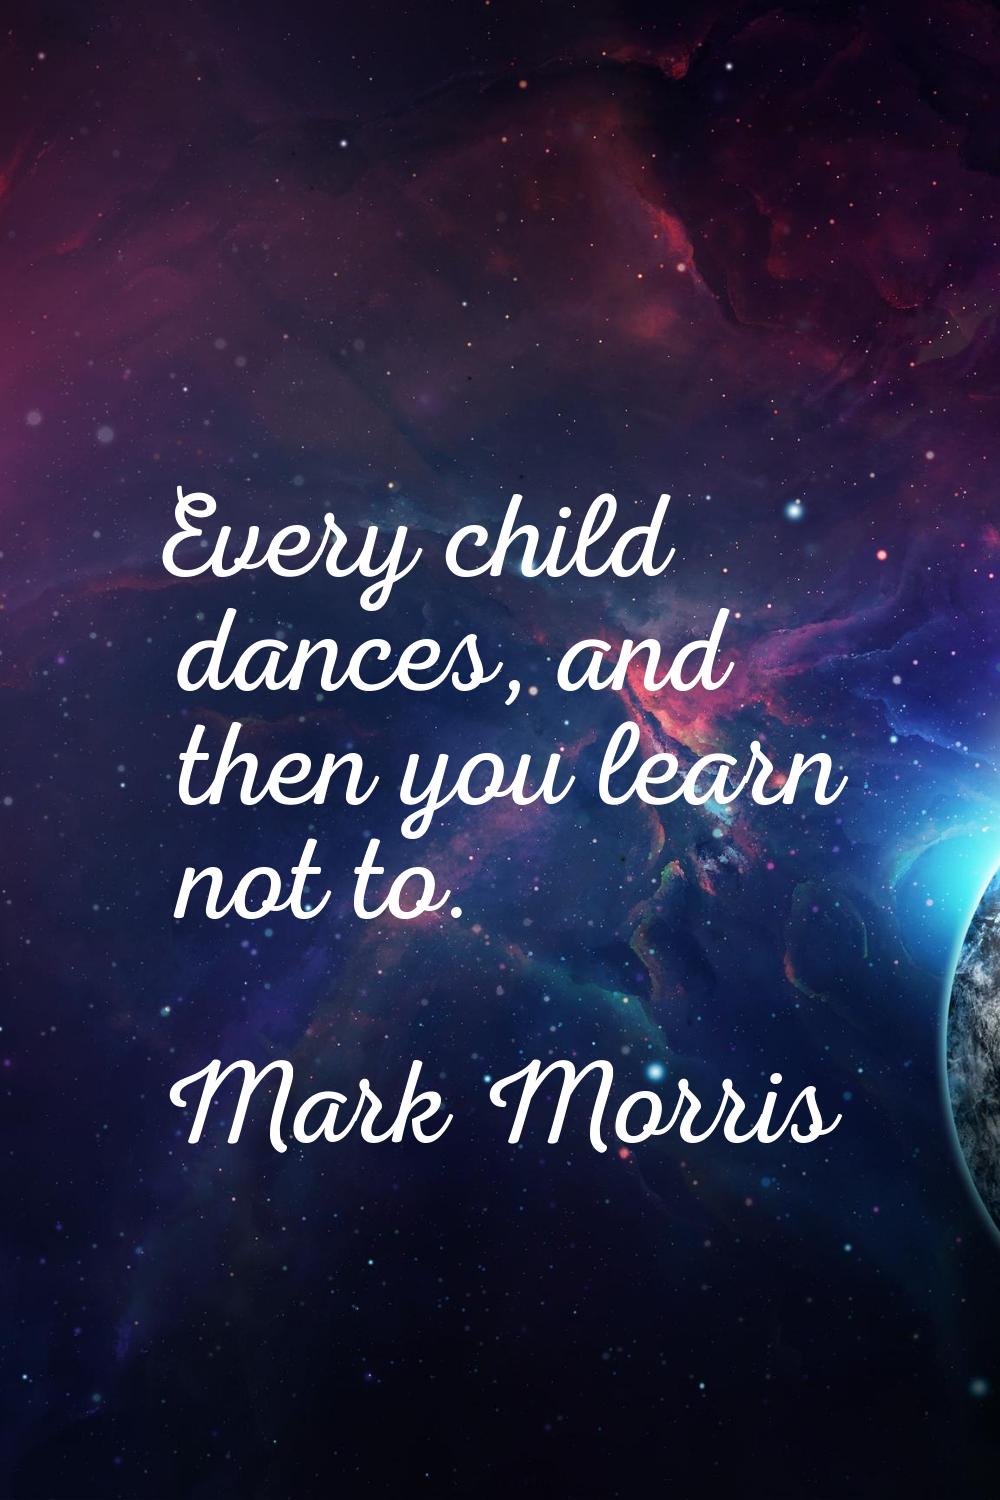 Every child dances, and then you learn not to.